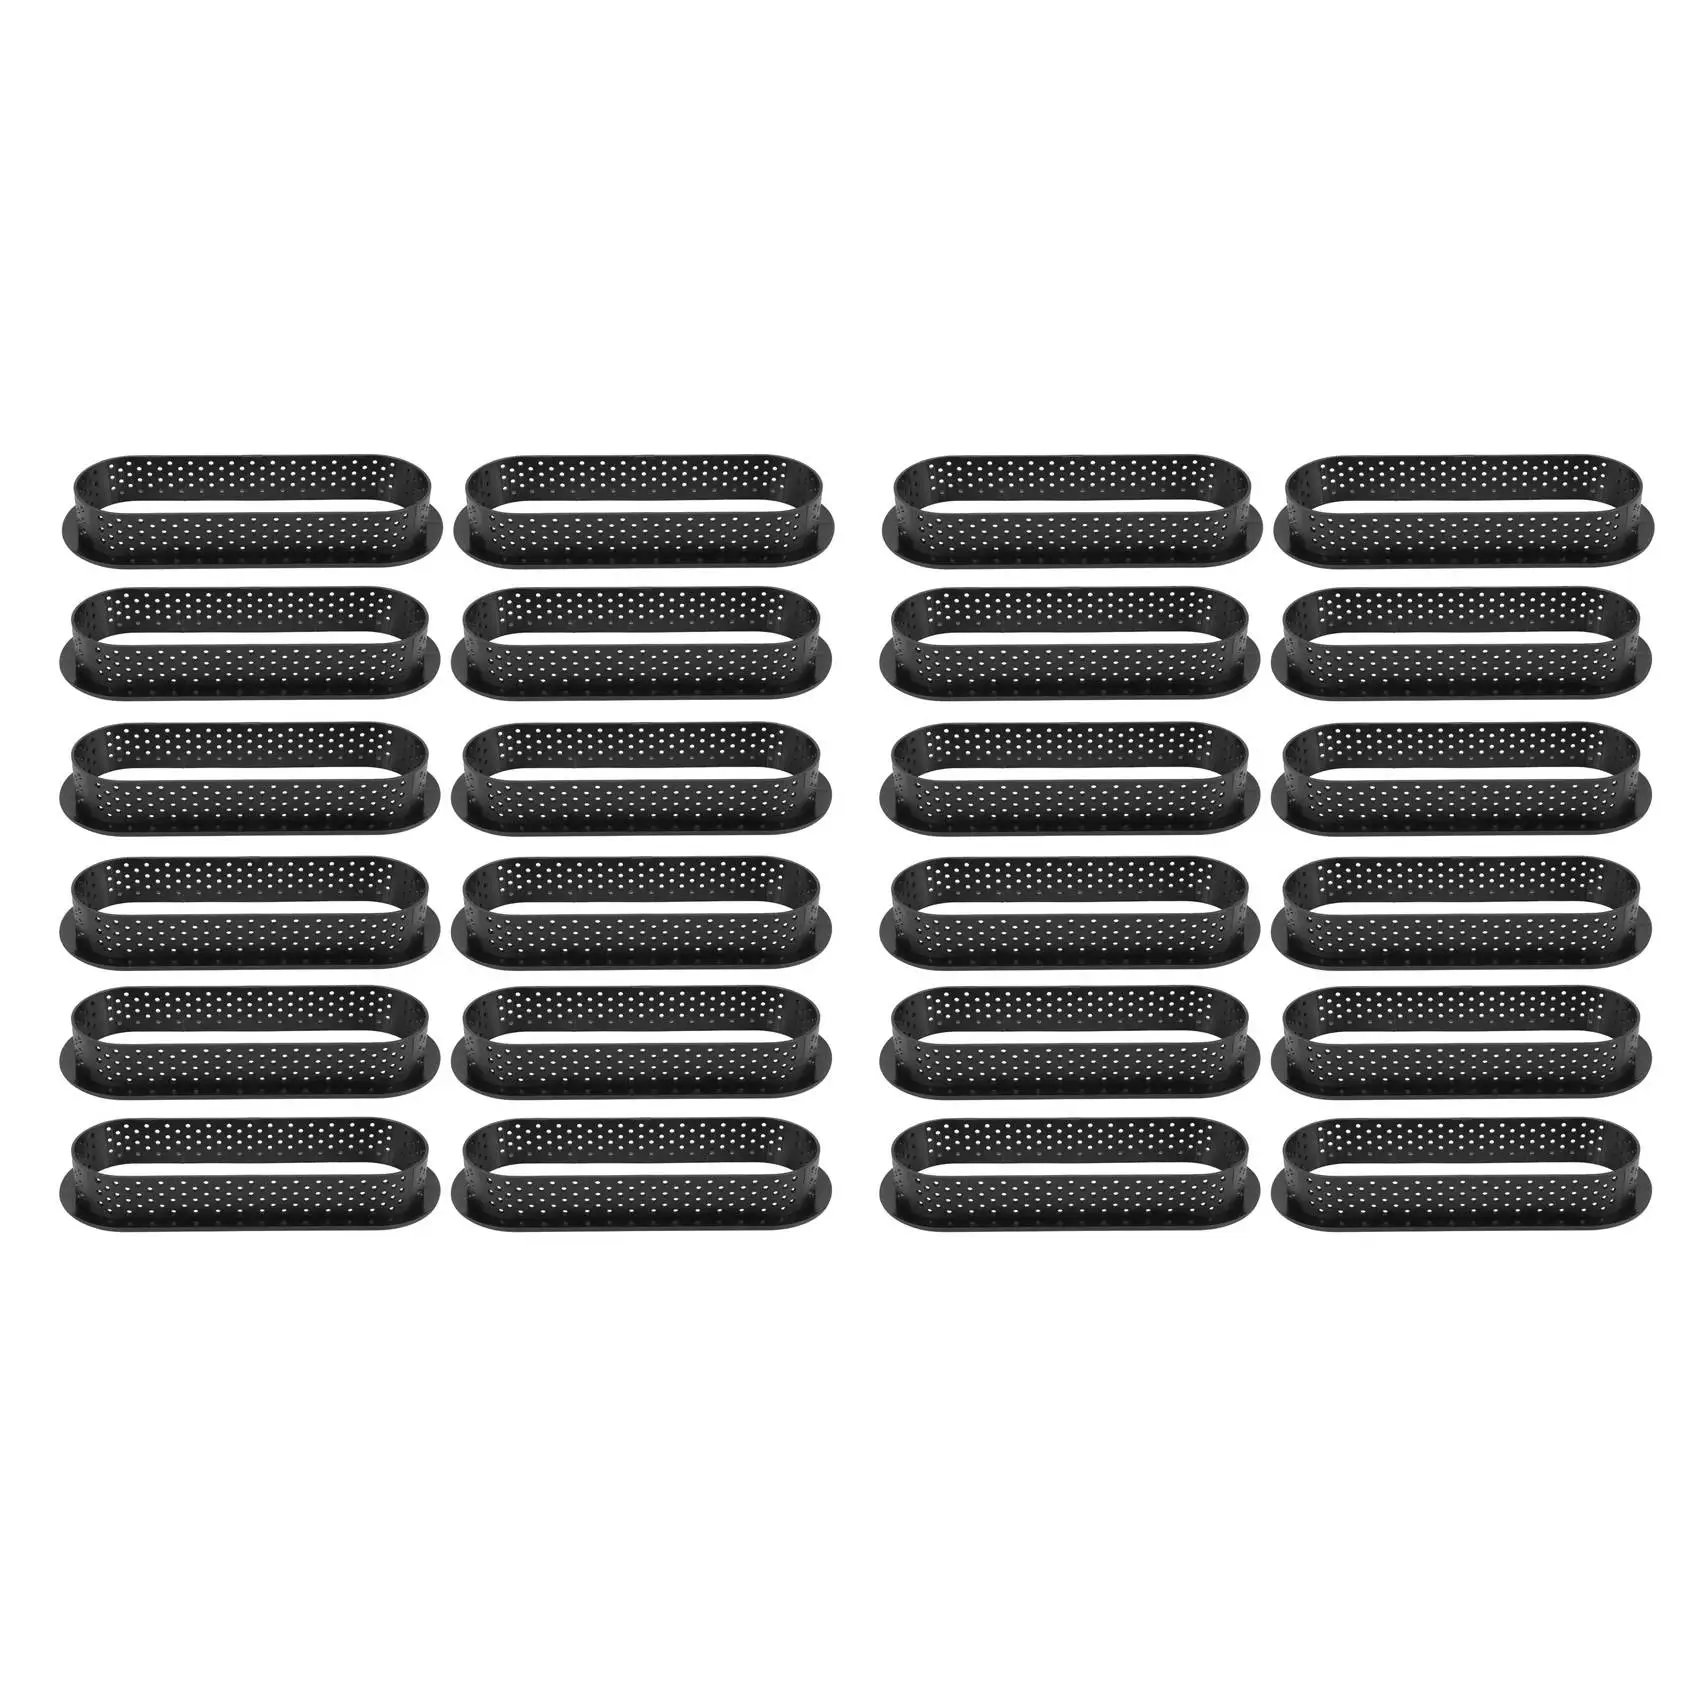 

24 Pieces Oval Tart Rings Heat-Resistant Perforated Cake Mousse Ring Non Stick Bakeware Tart Mini Cake Mold Cake Rings